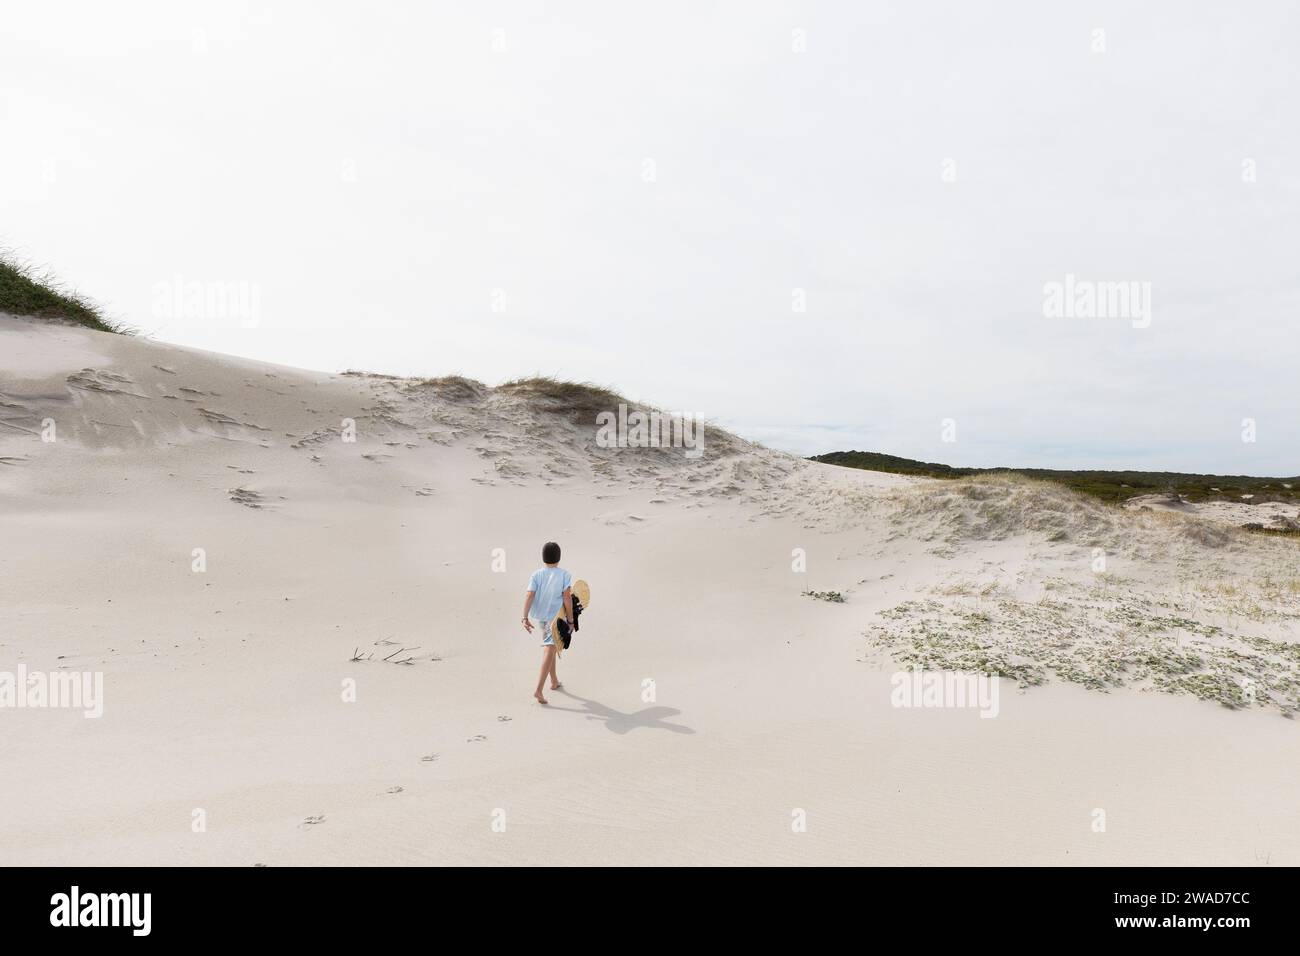 Boy (10-11) carrying surfboard in Walker Bay Nature Reserve Stock Photo